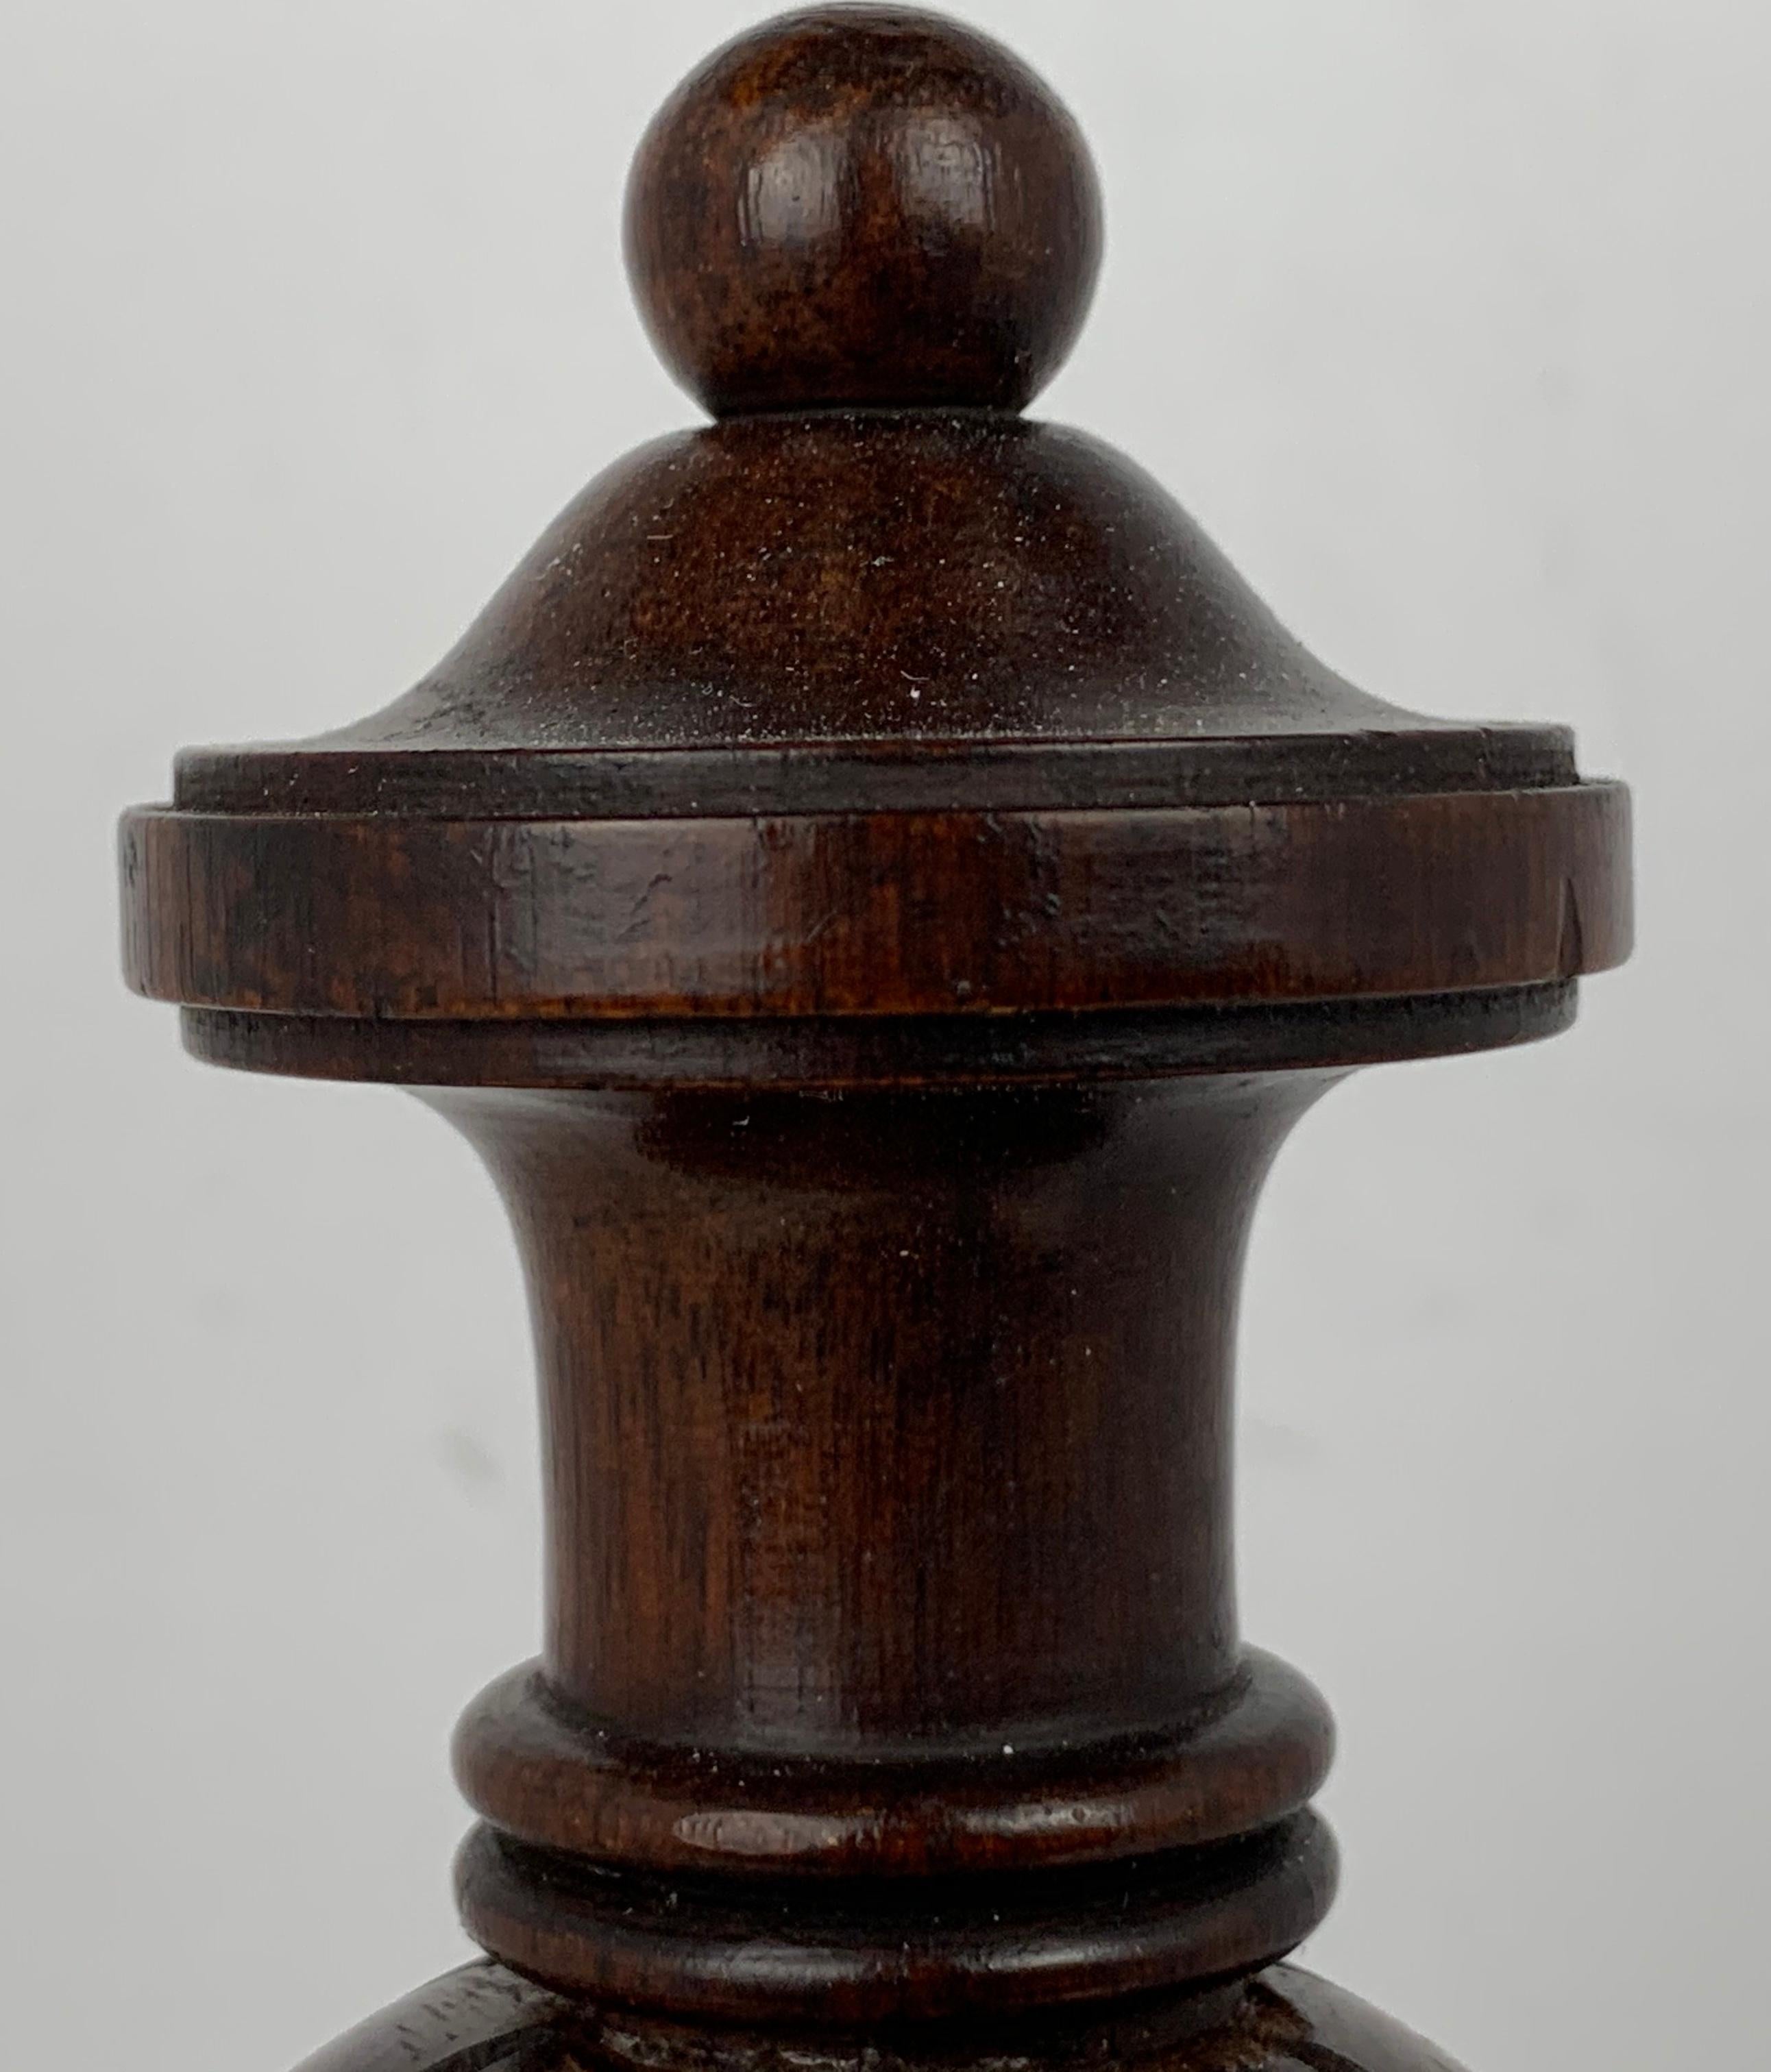 Period large turned solid mahogany finial that has been placed on a custom Lucite stand. Originally made to be placed on a piece of 19th century furniture. A wonderful item for a desk or on any table or bookshelf.

Hand polished in our workshop.